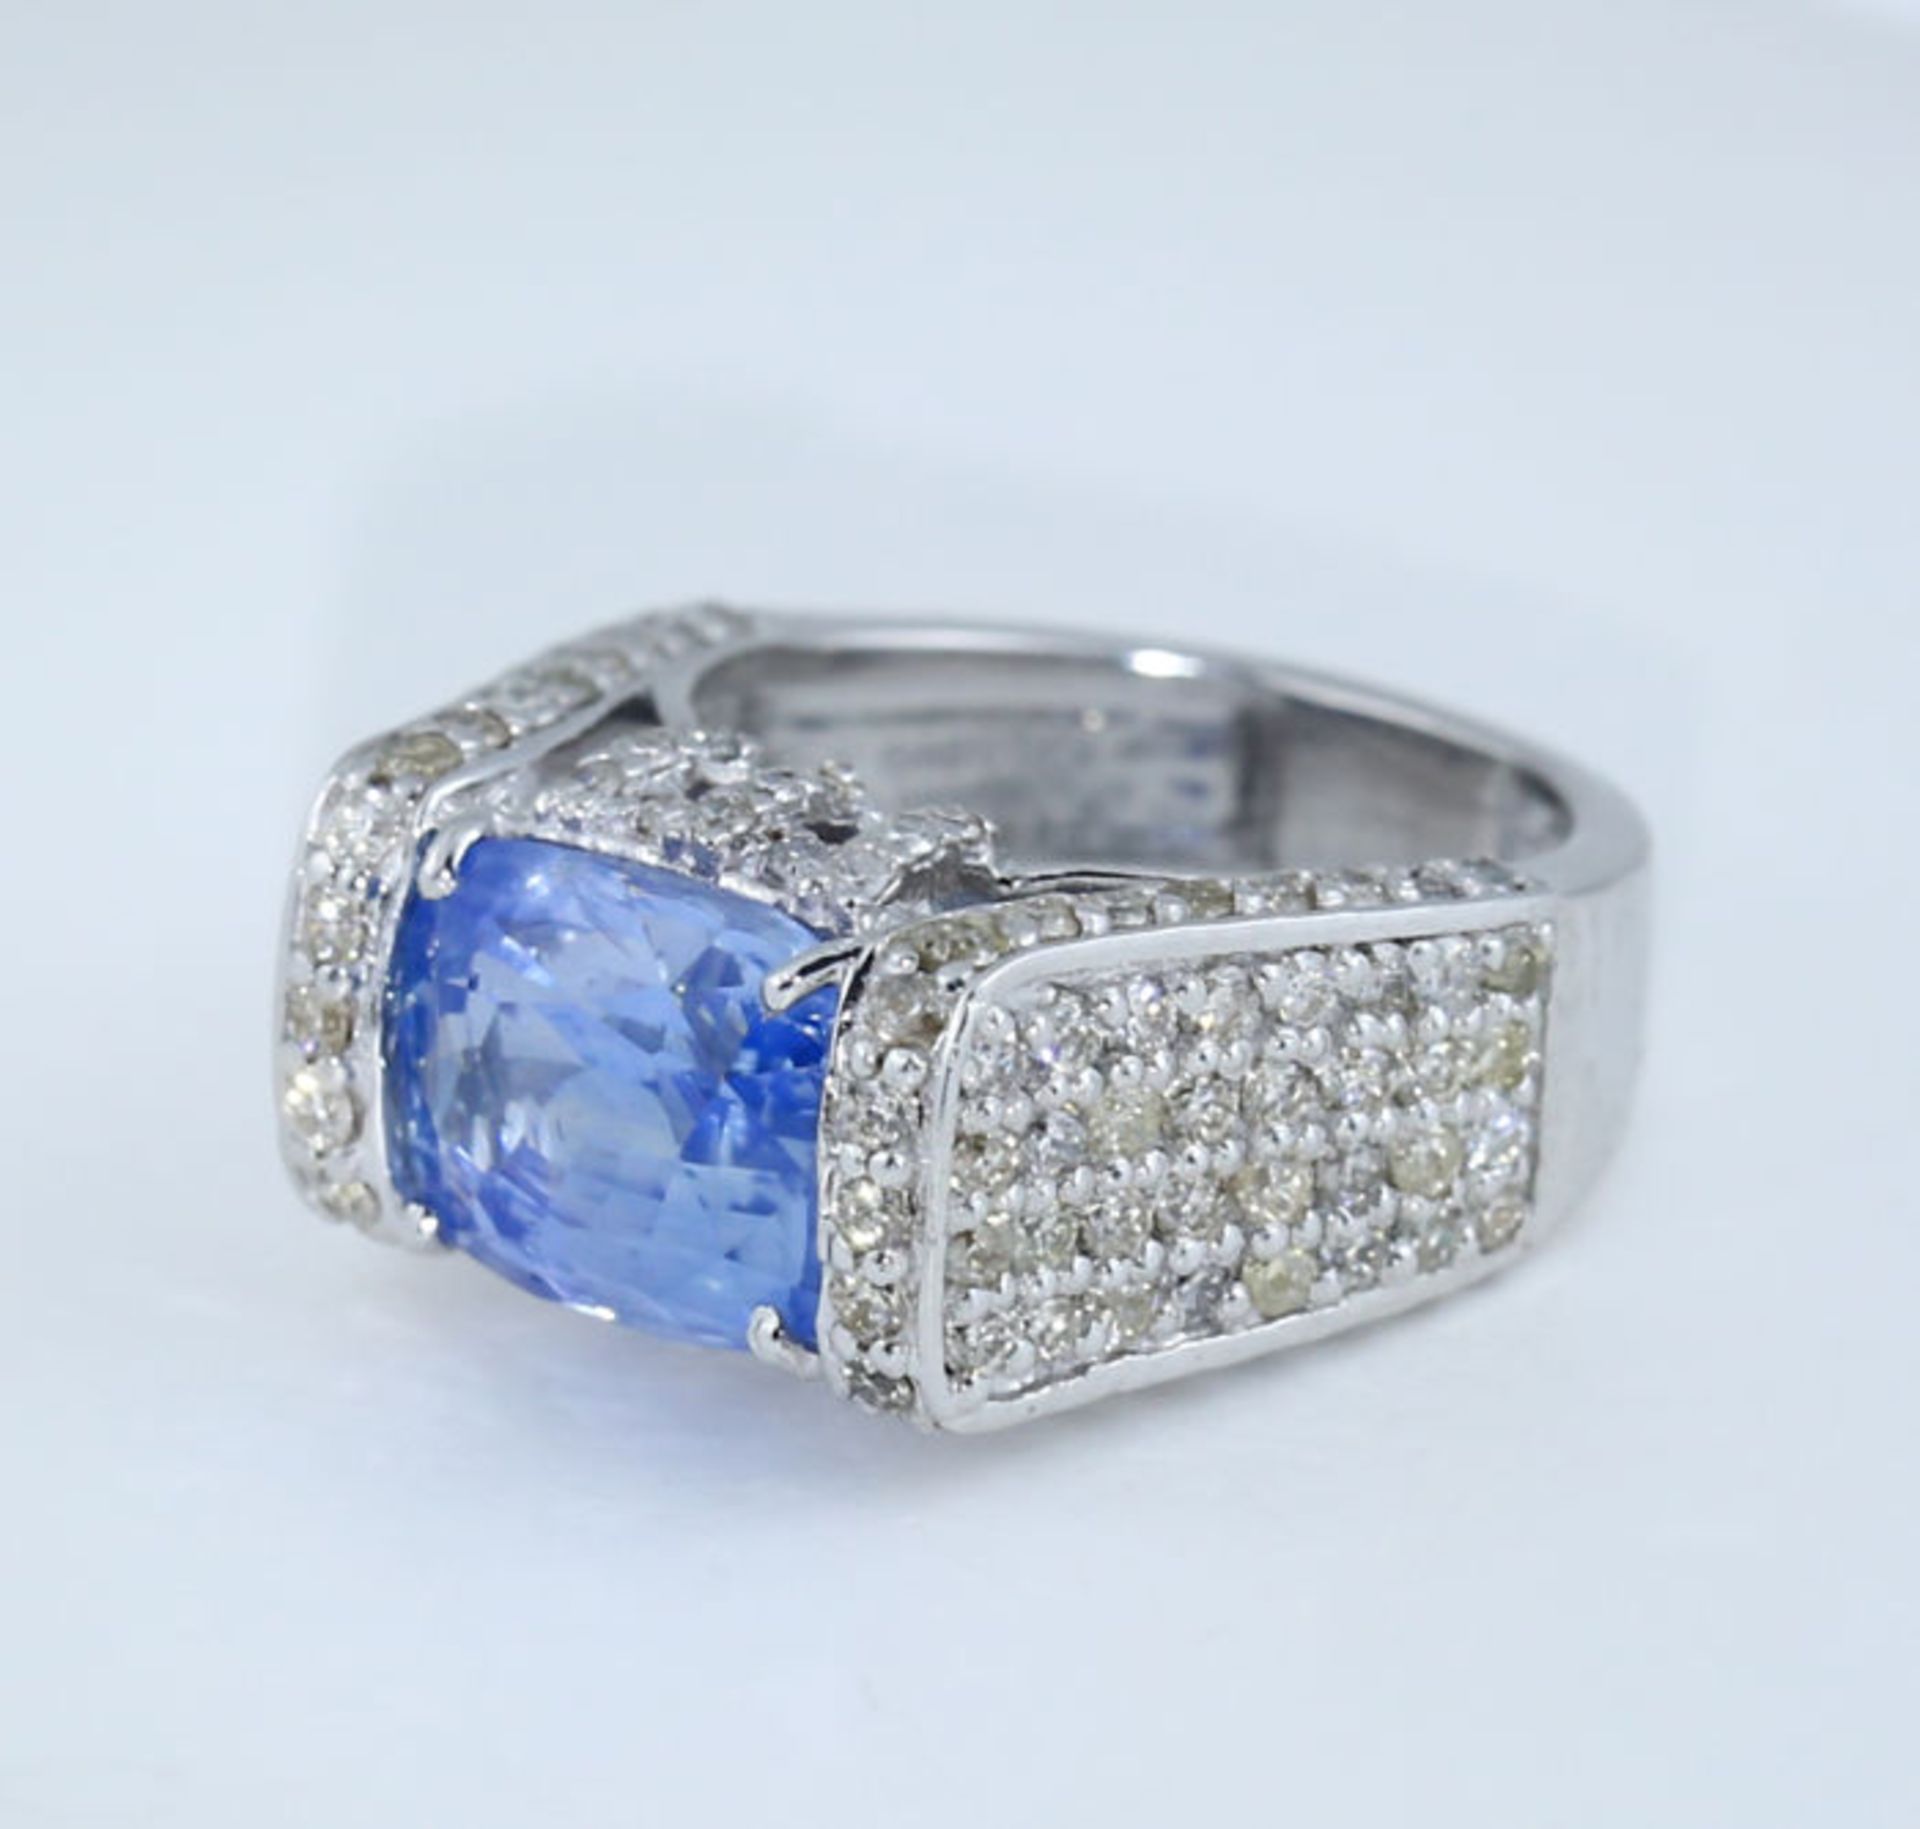 14 K / 585 White Gold Very Exclusive Designer Blue Sapphire (IGI certified) and Diamond Ring - Image 6 of 8